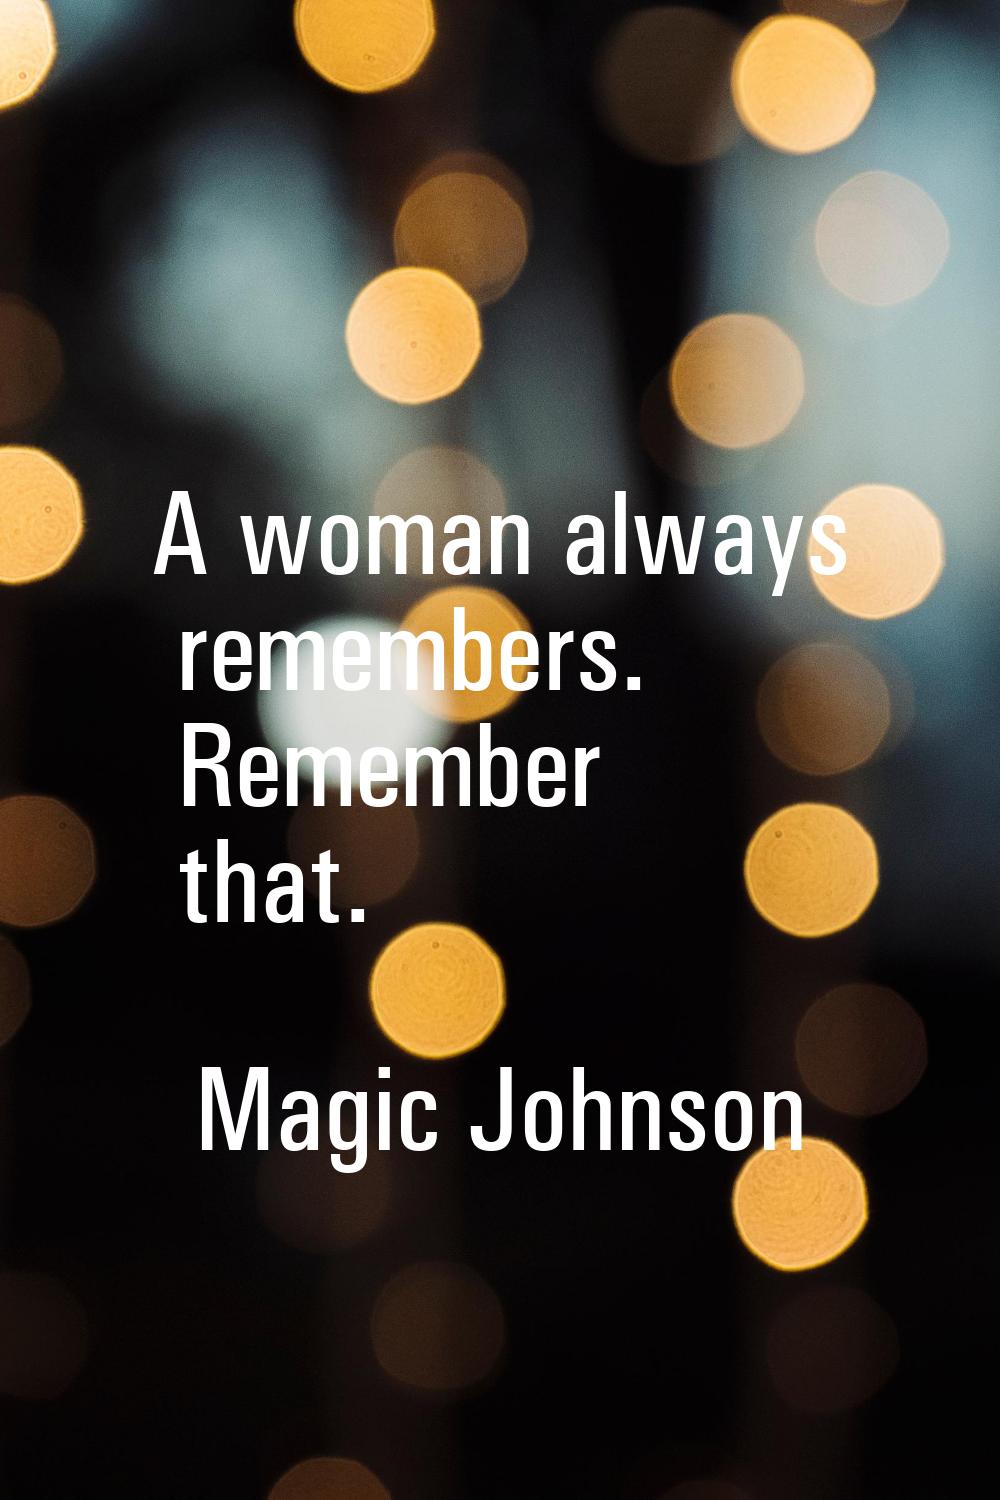 A woman always remembers. Remember that.